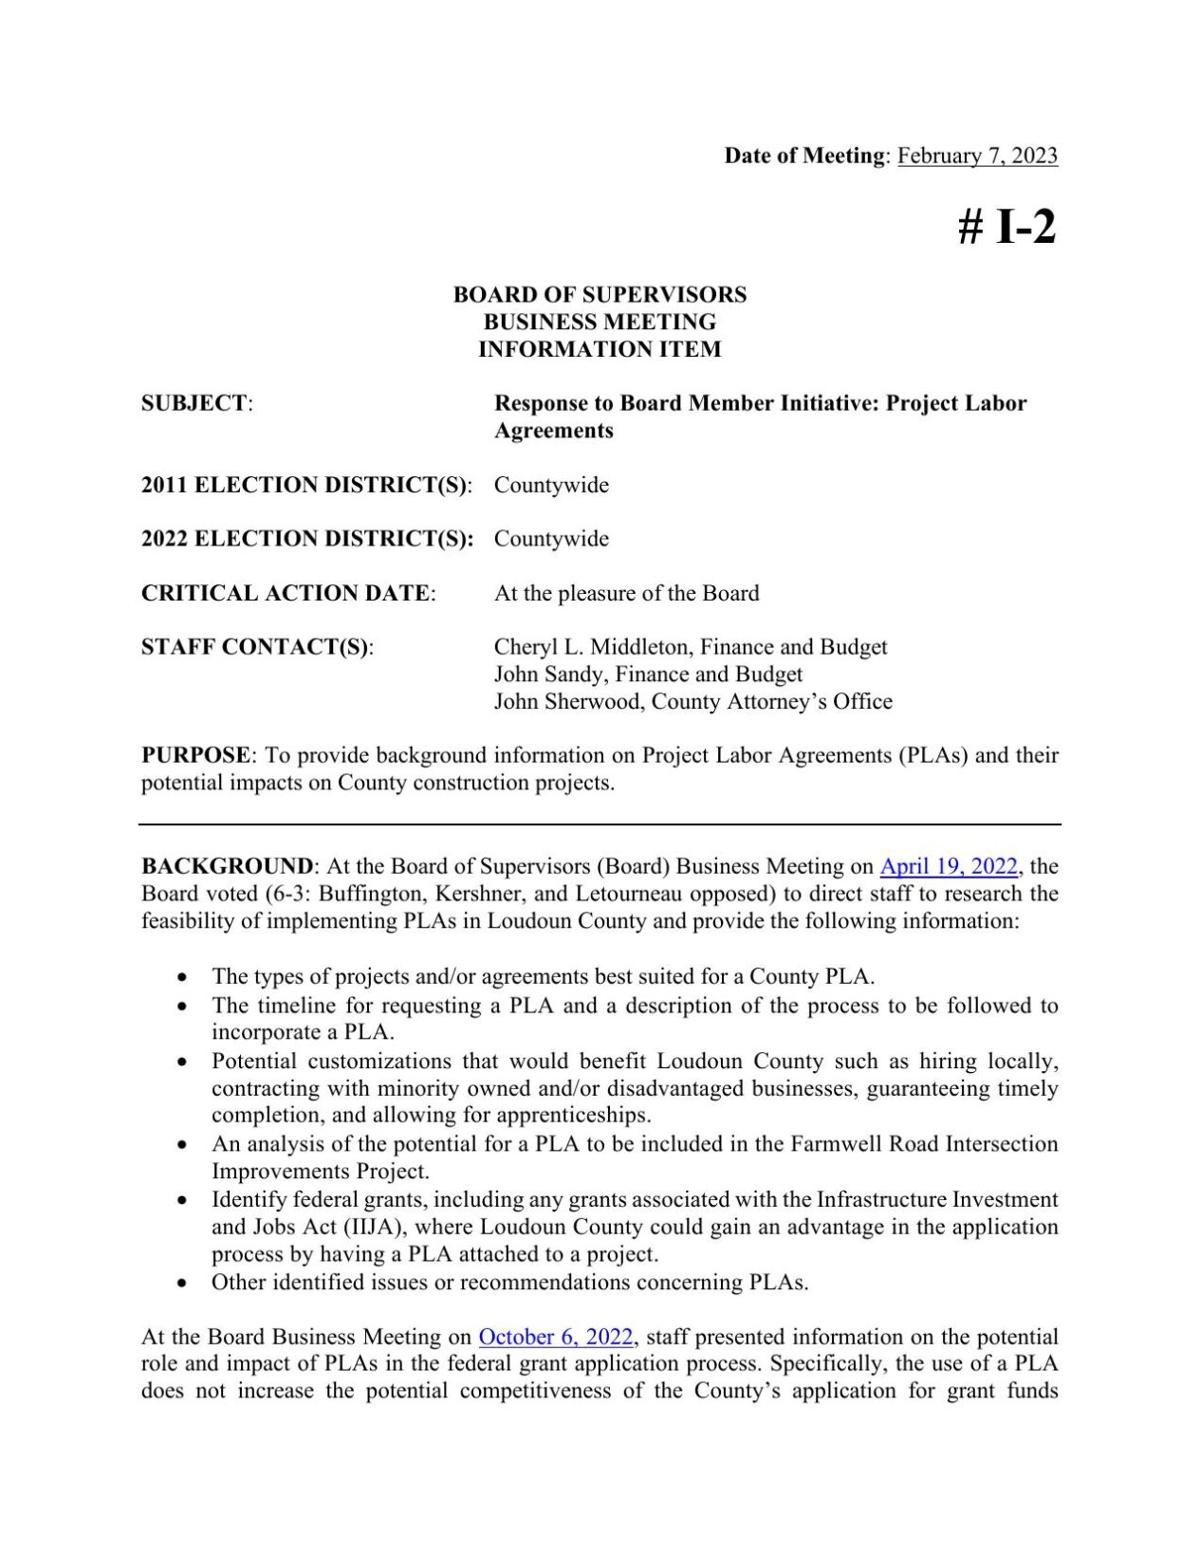 Item I-2 Response to BMI-Project Labor Agreements (2).pdf